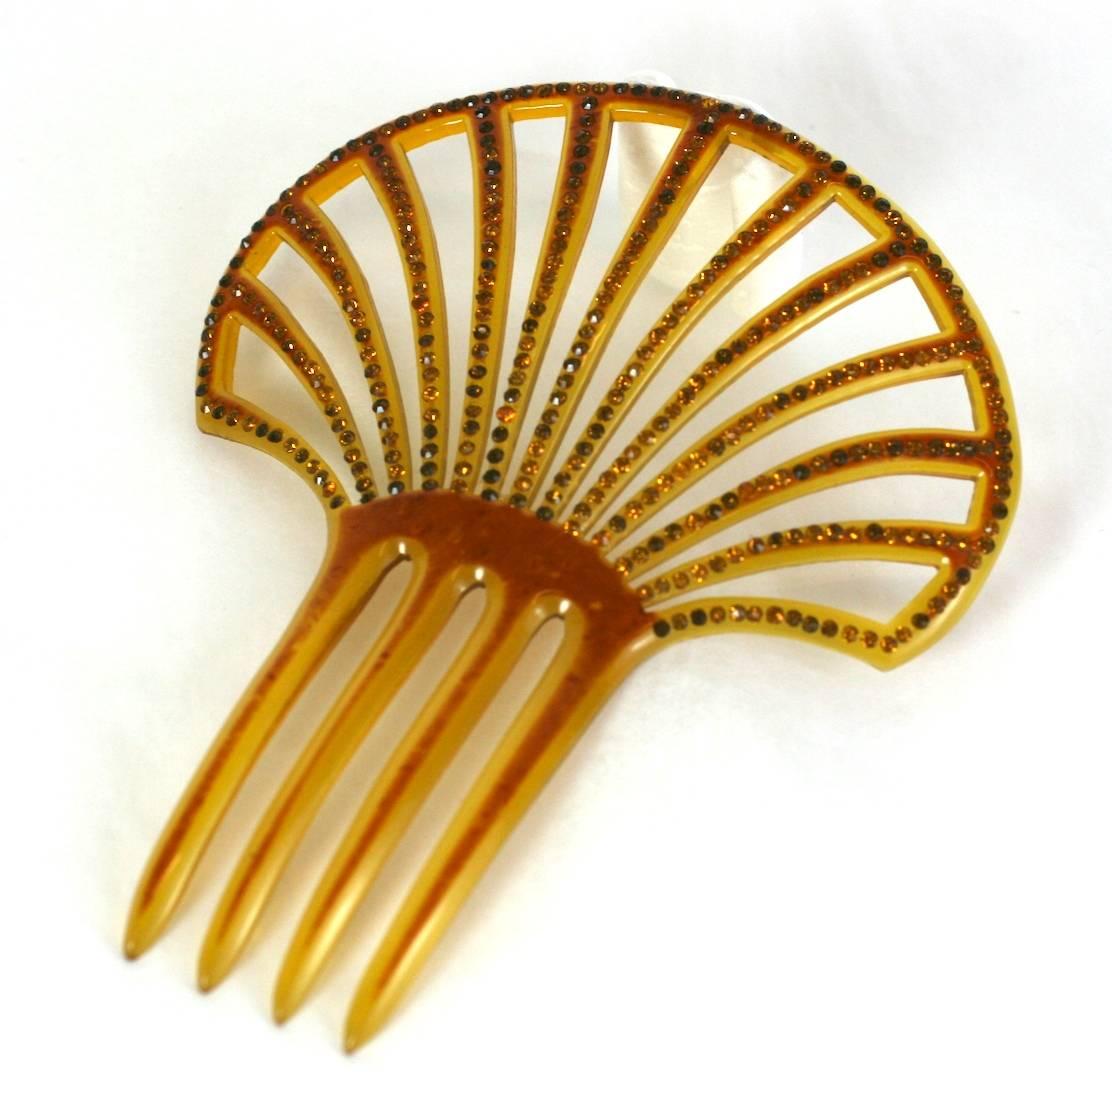 Art Deco Pierced Celluloid Comb from the 1920's. The celluloid has been patinaed and dozens of citrine pastes have been set along the openwork fan shape. France 1920's. Excellent condition. 